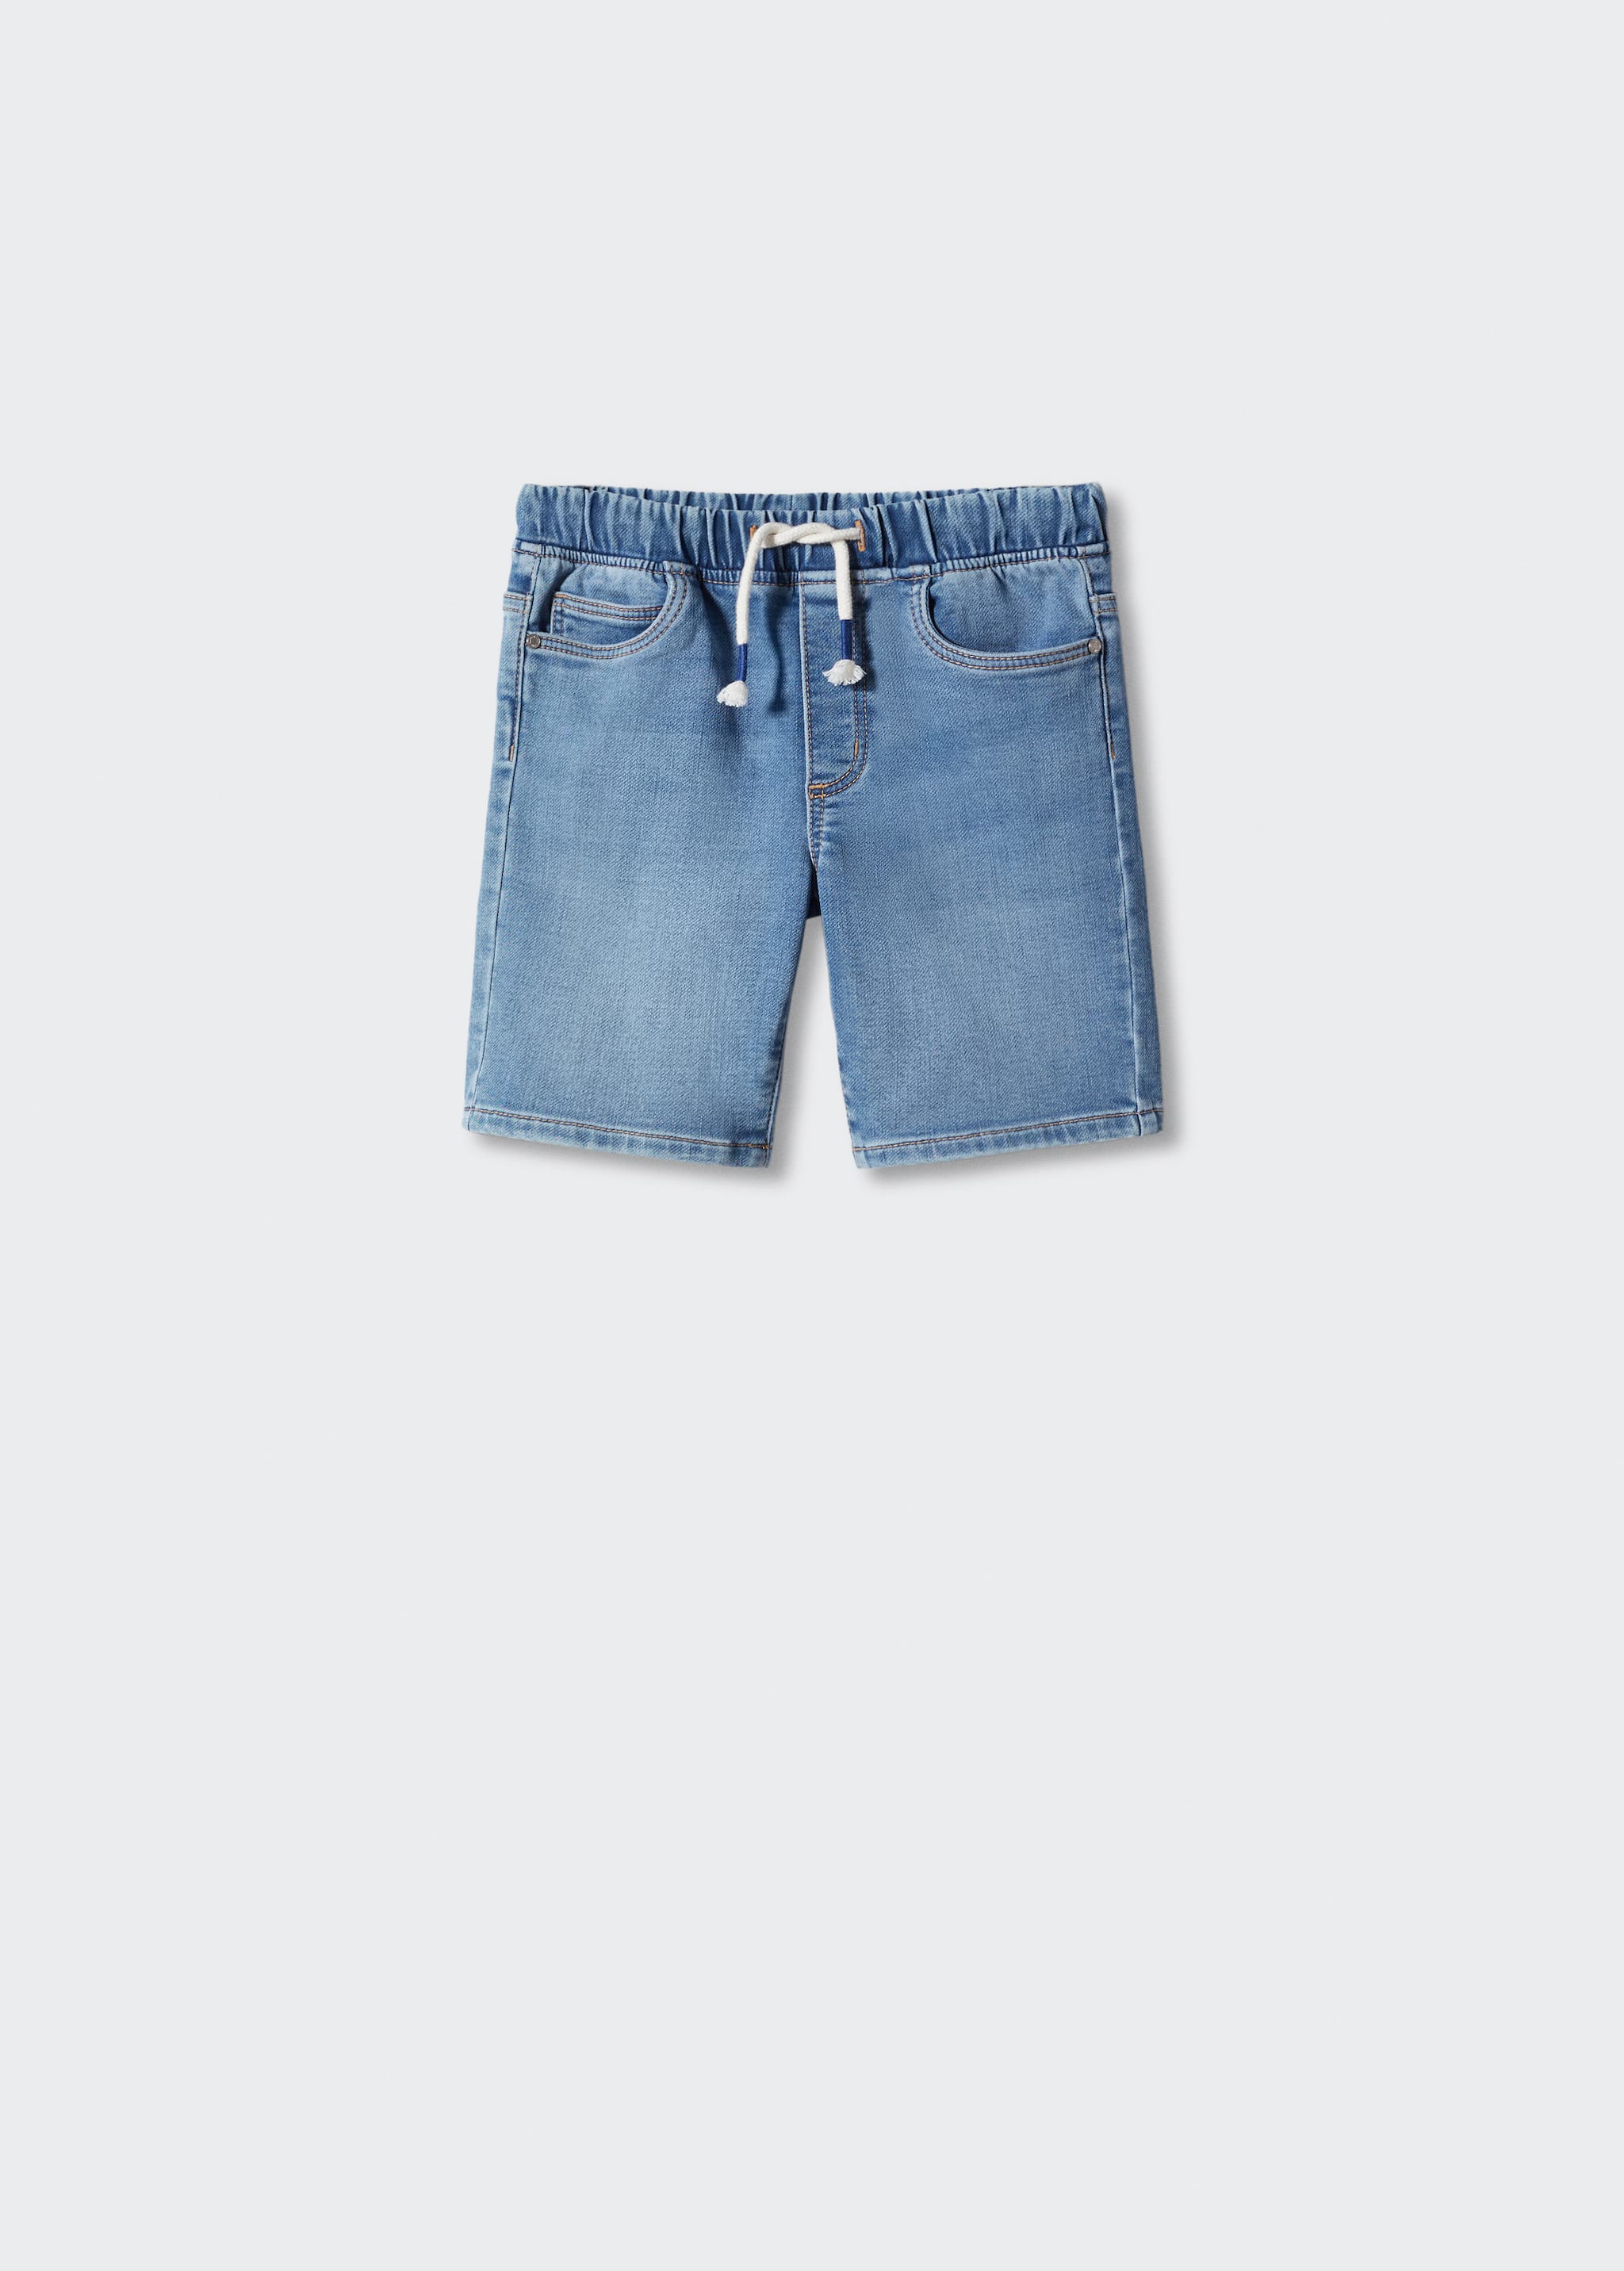 Comfy-fit denim Bermuda shorts - Article without model